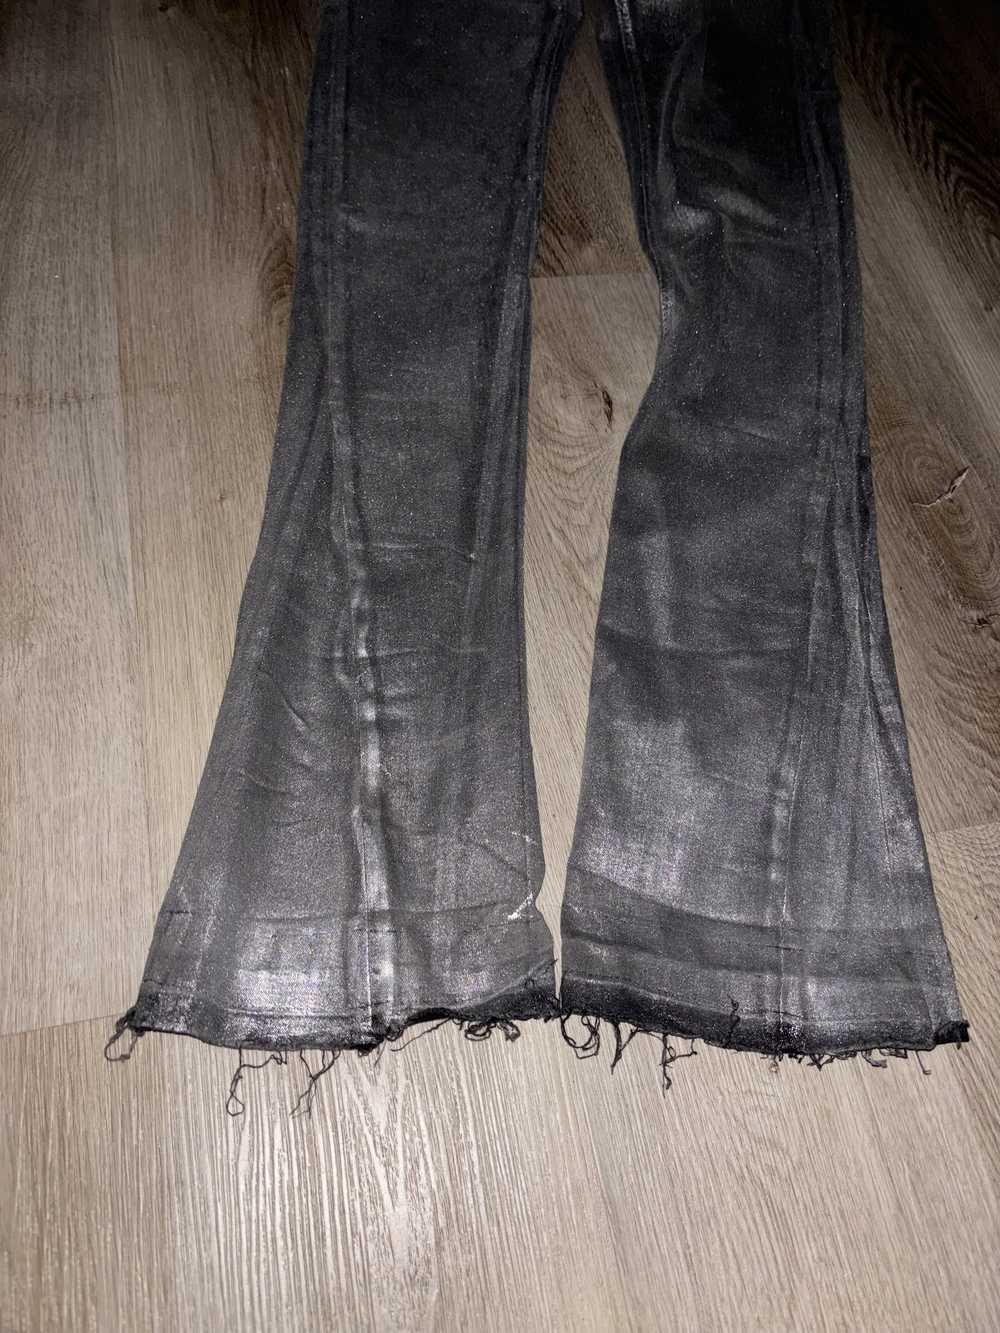 Designer Flaneur Flared Silver Waxed Coated Jeans - image 4